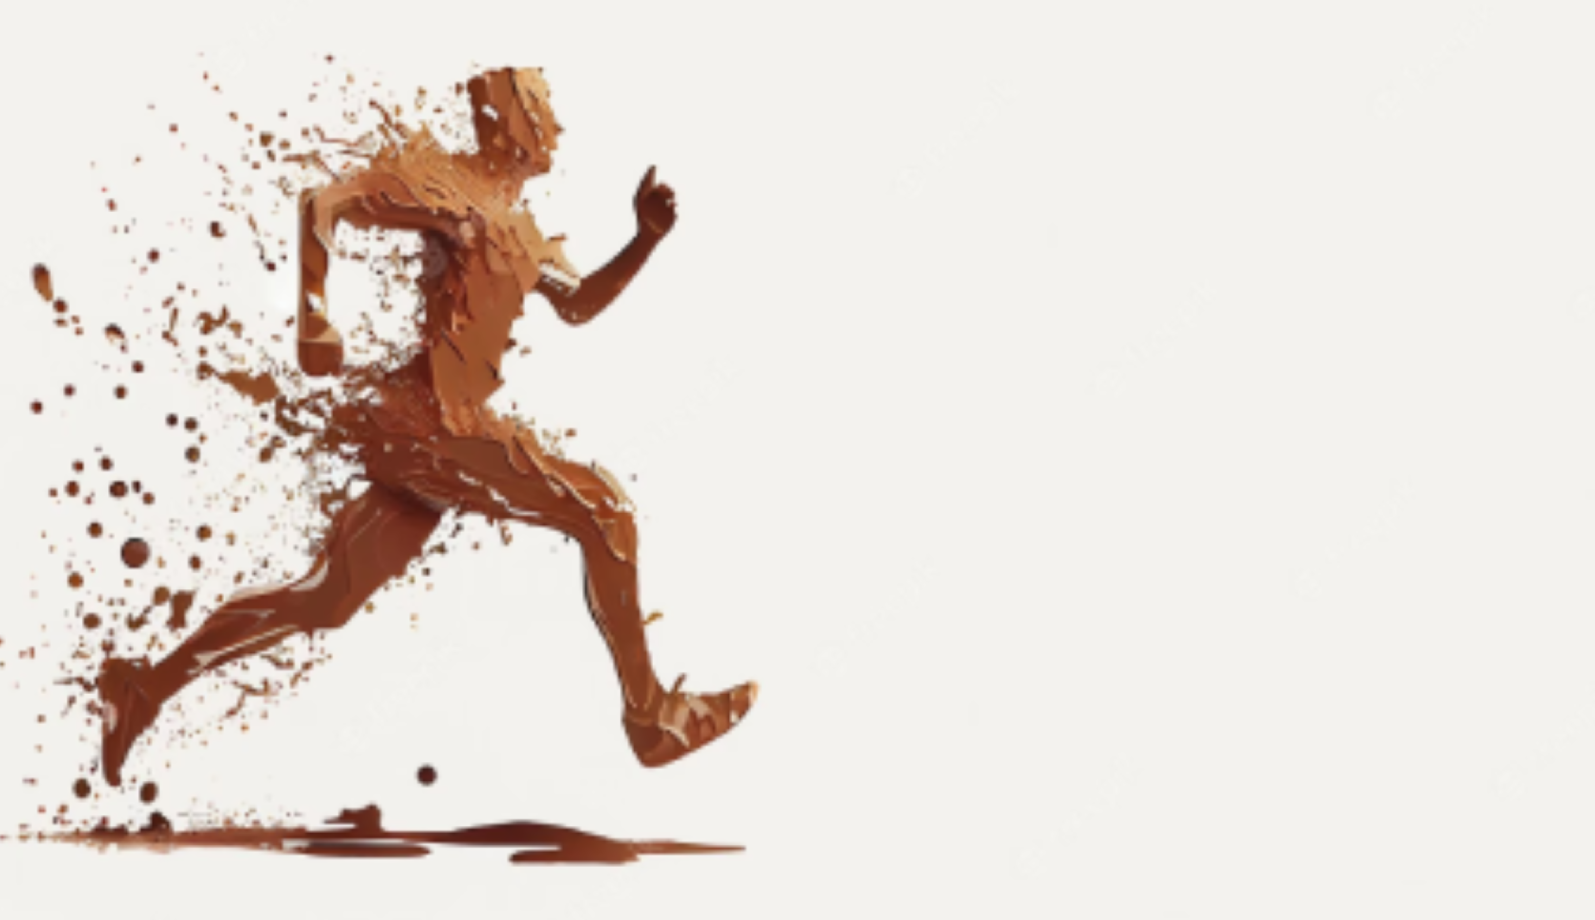 What are the benefits of coffee for runners?